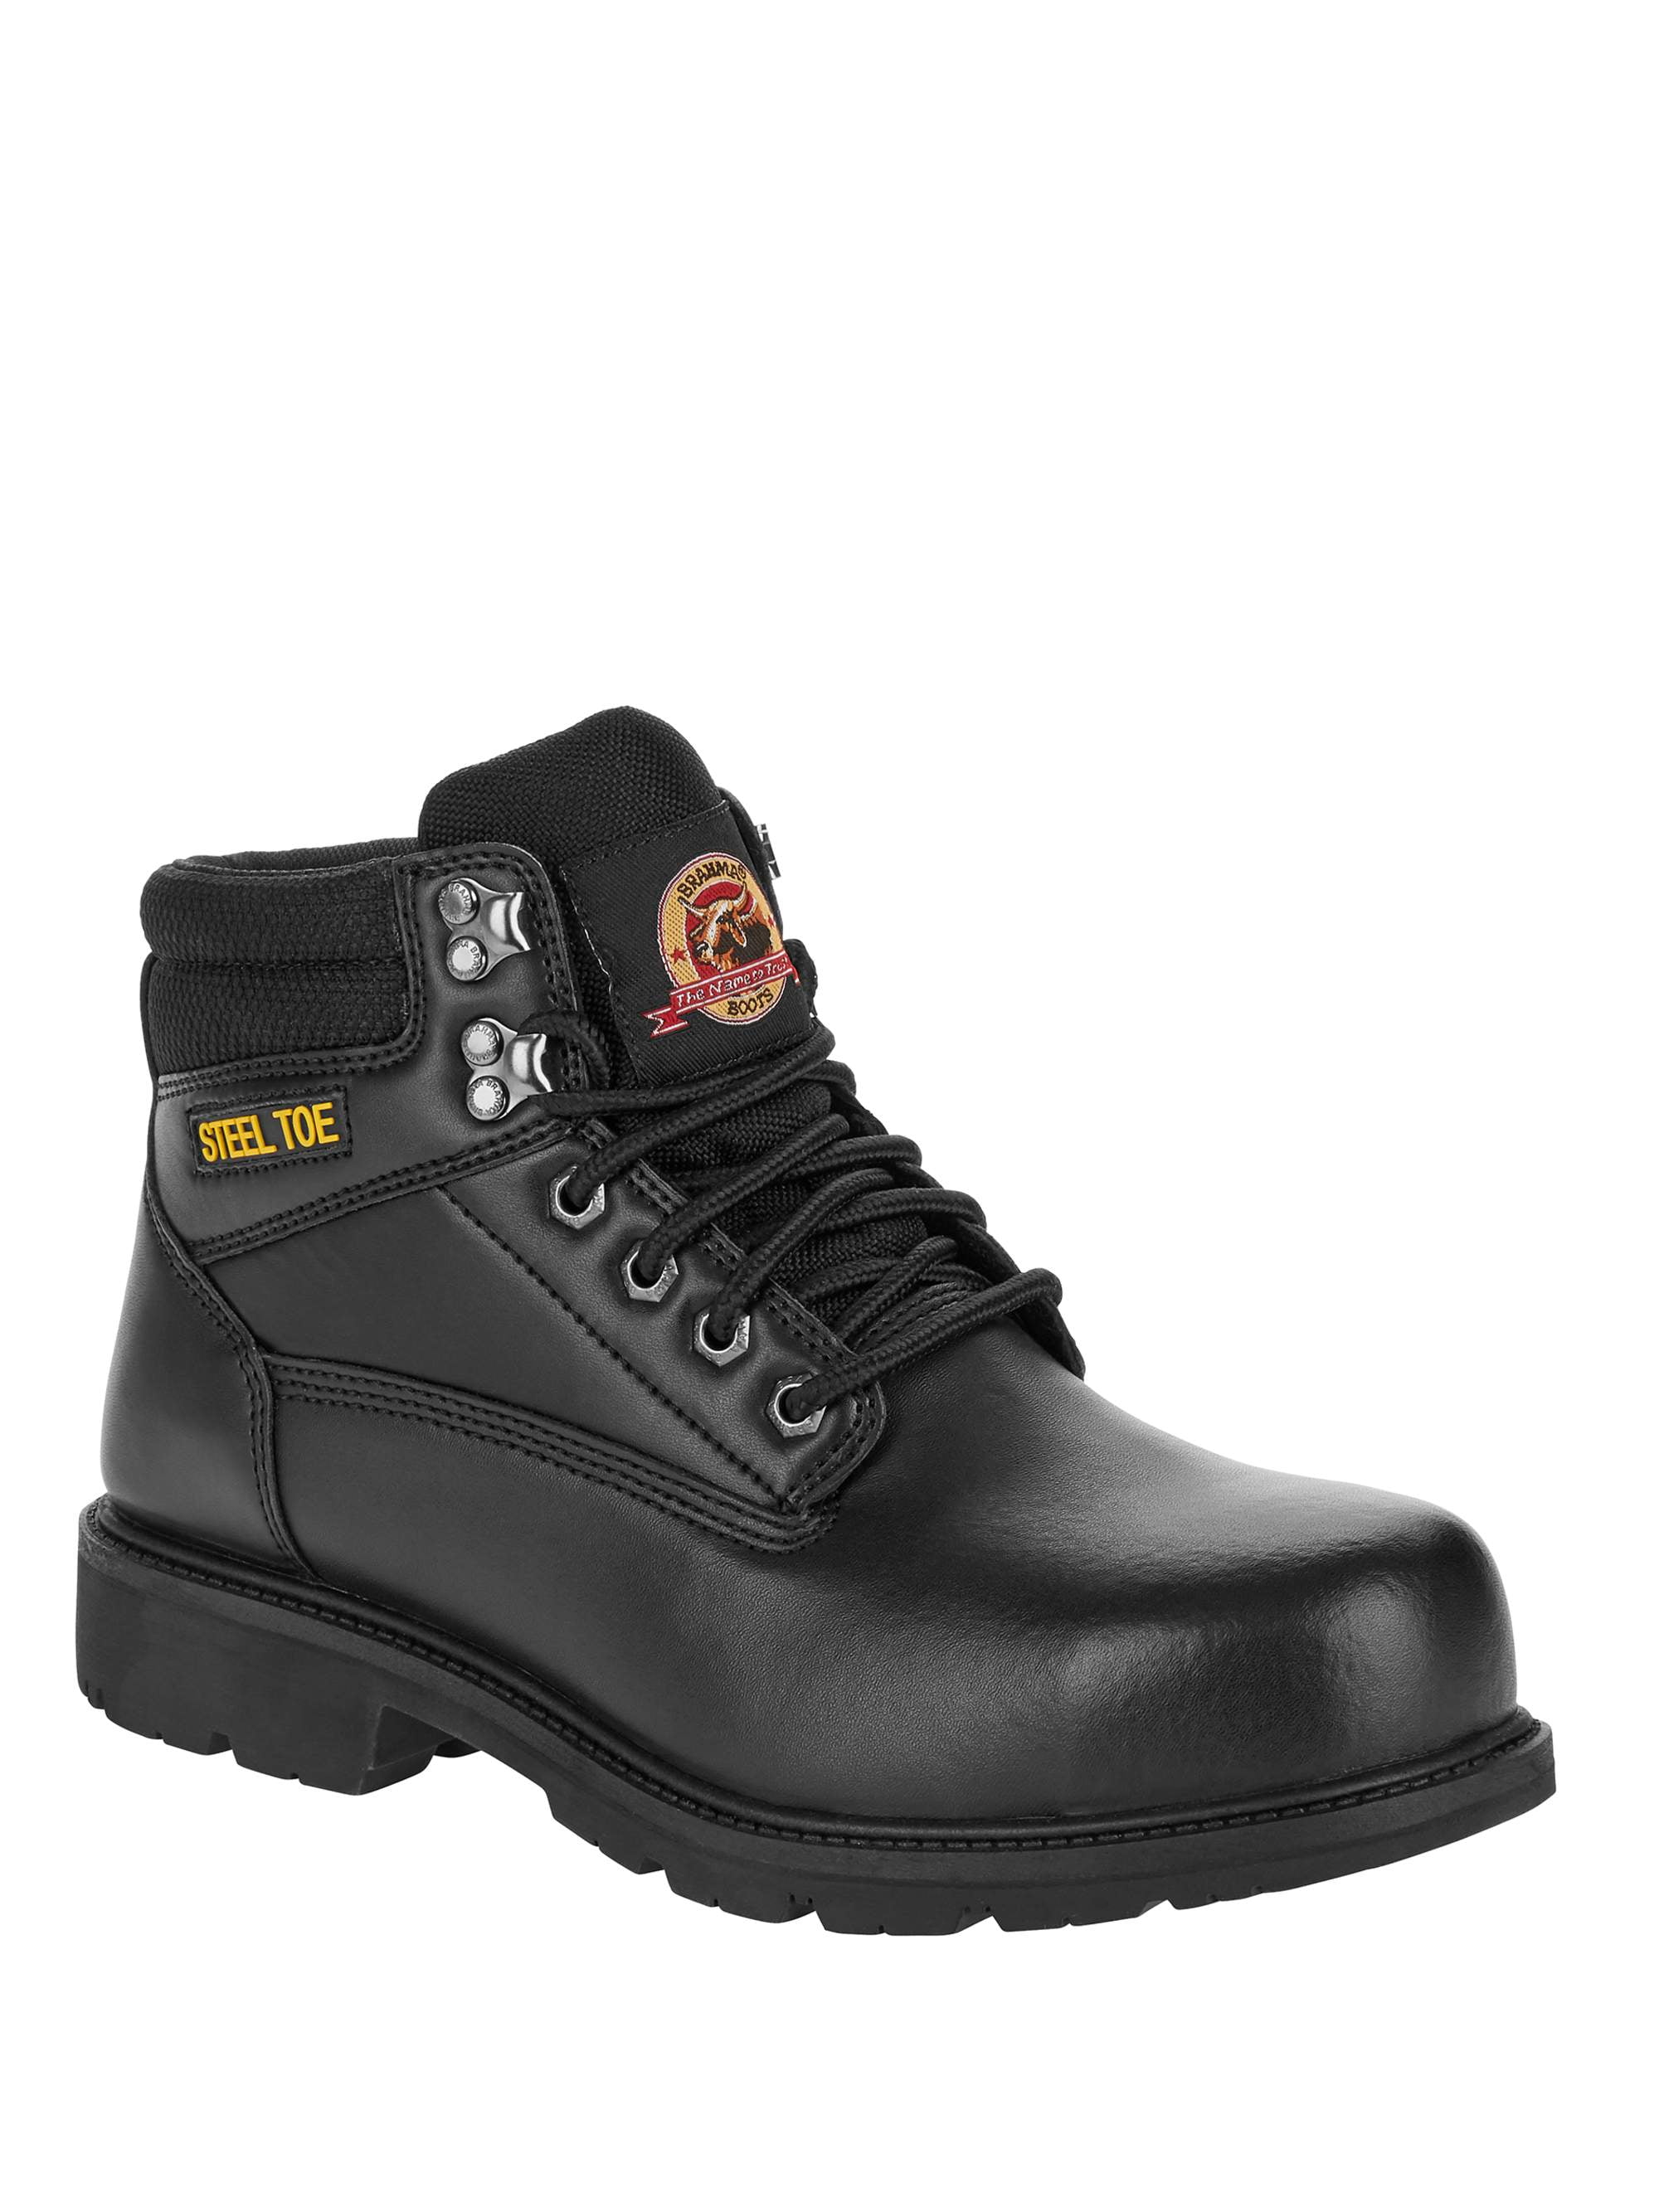 leather boots steel toe